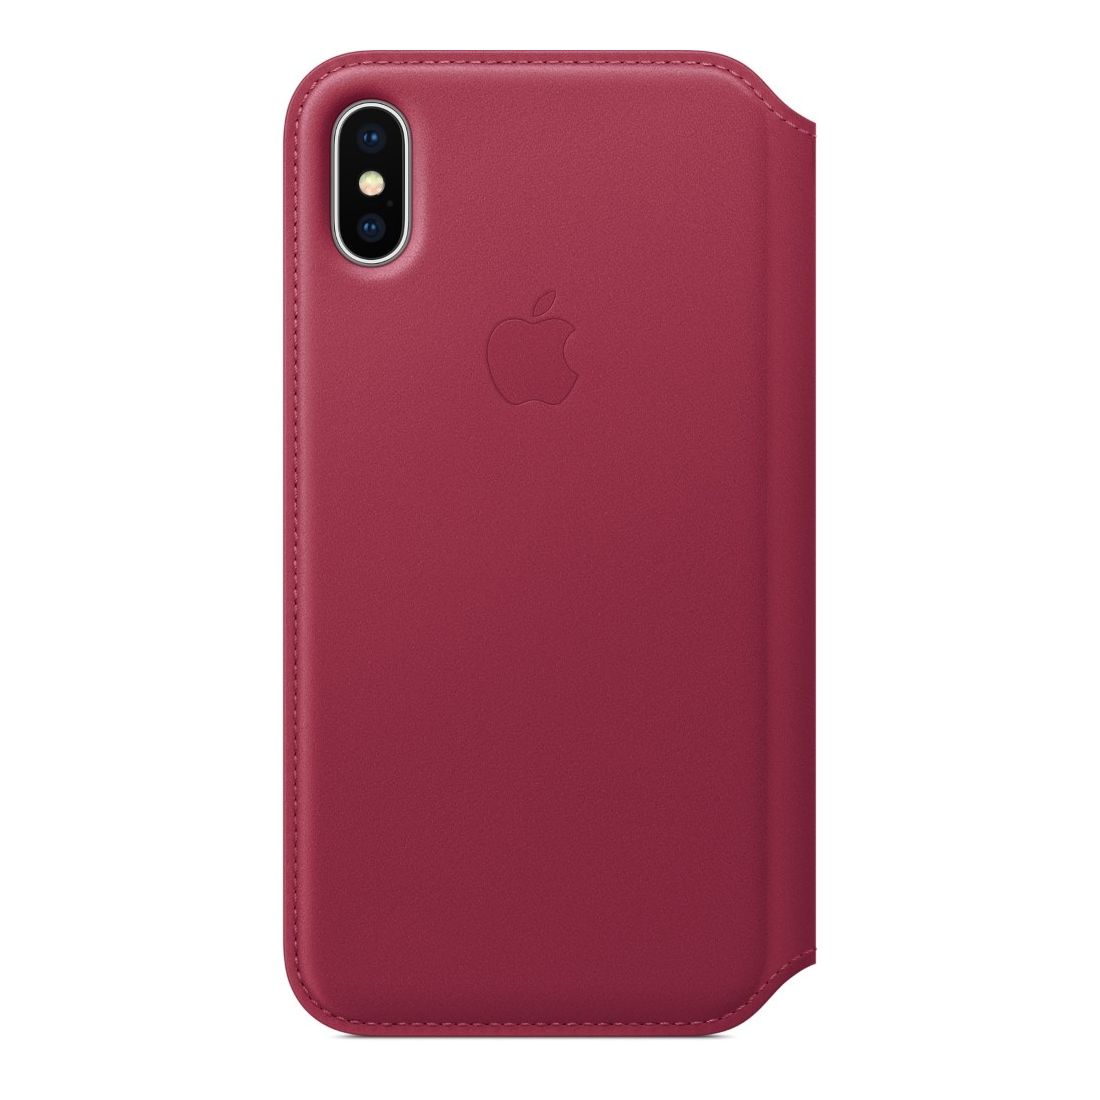 Apple Leather Folio Case Berry for iPhone X